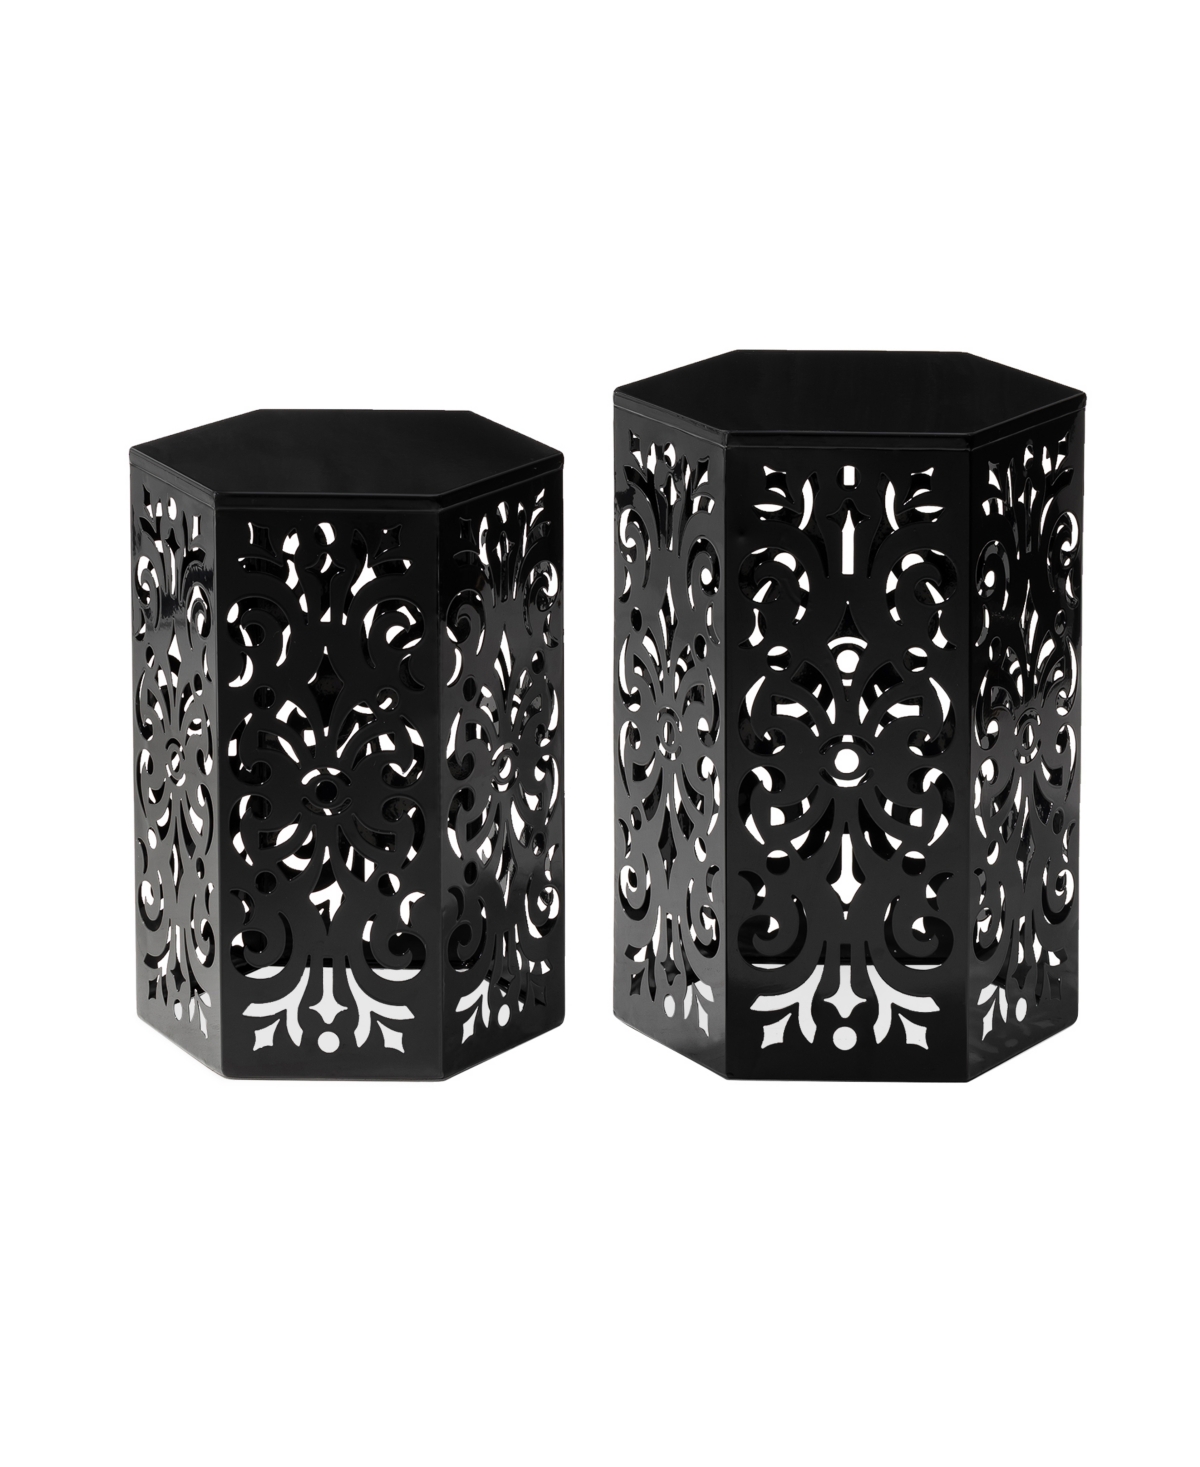 Multi-Functional Set of 2 Black Iron Cutout Floral Garden Stools or Planter Stand - Black